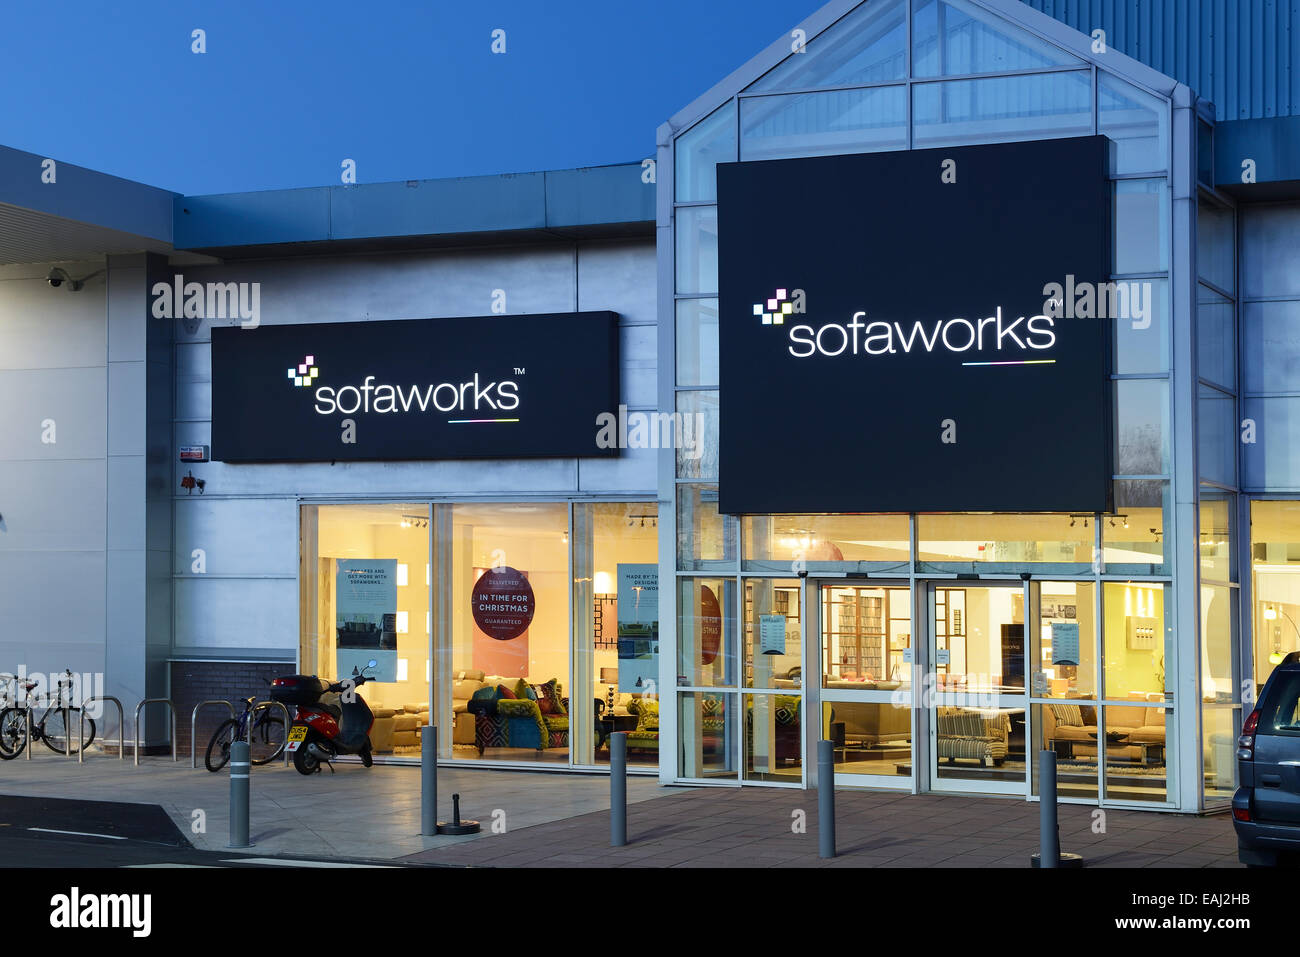 Sofaworks store entrance at night Stock Photo